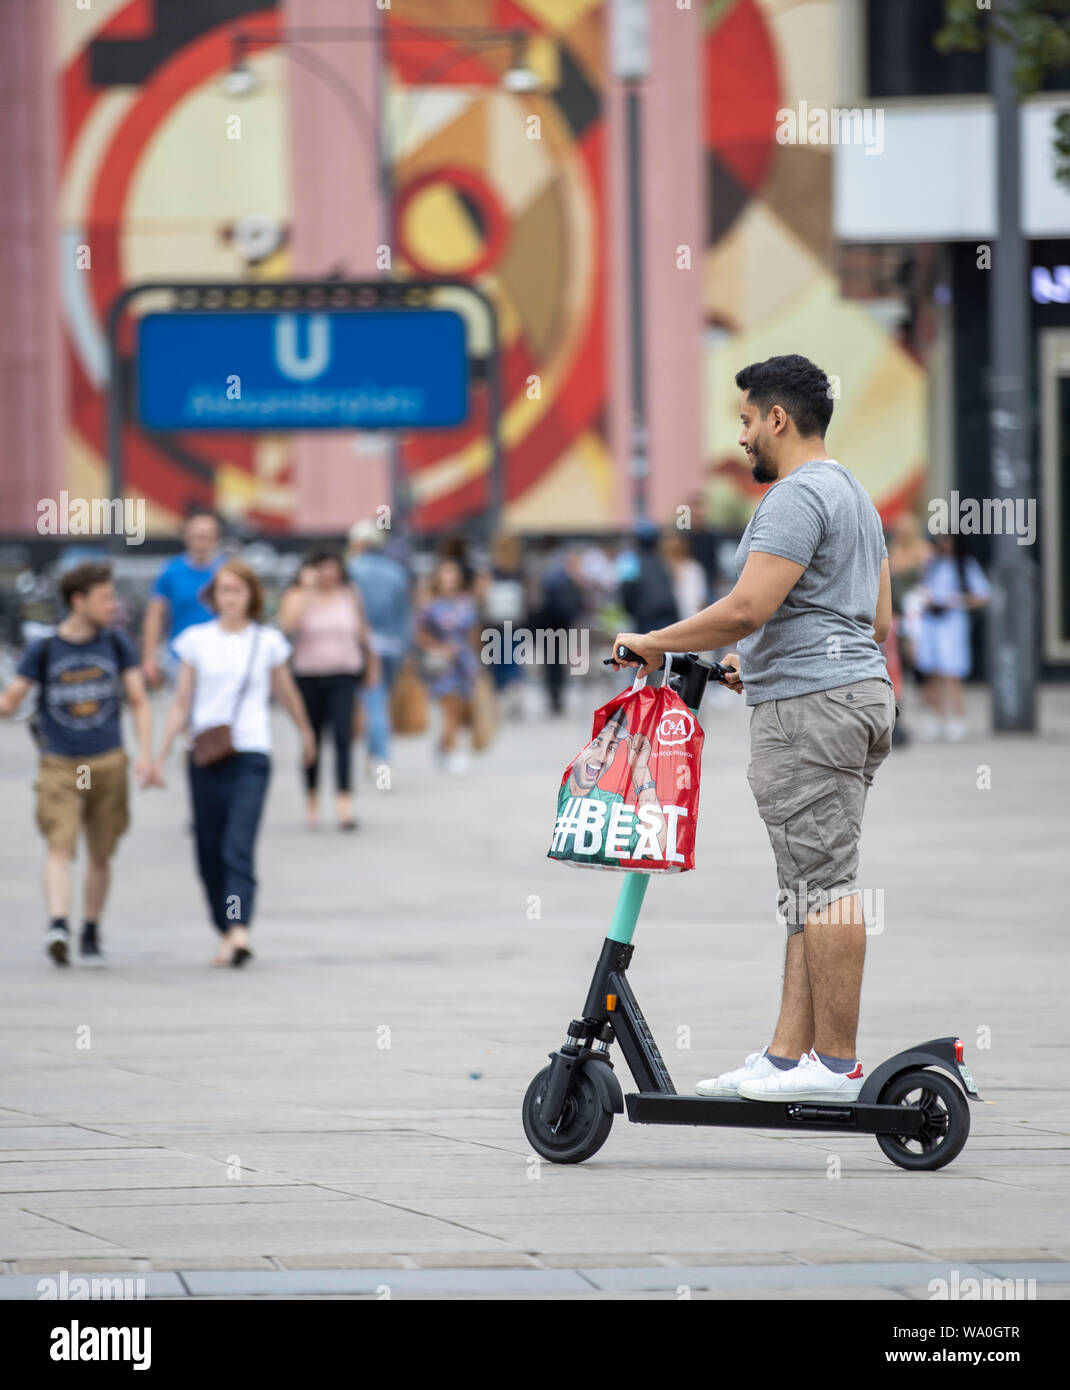 E-scooter, electric scooter, rental scooter, driving, at Alexander in Berlin Stock Photo - Alamy